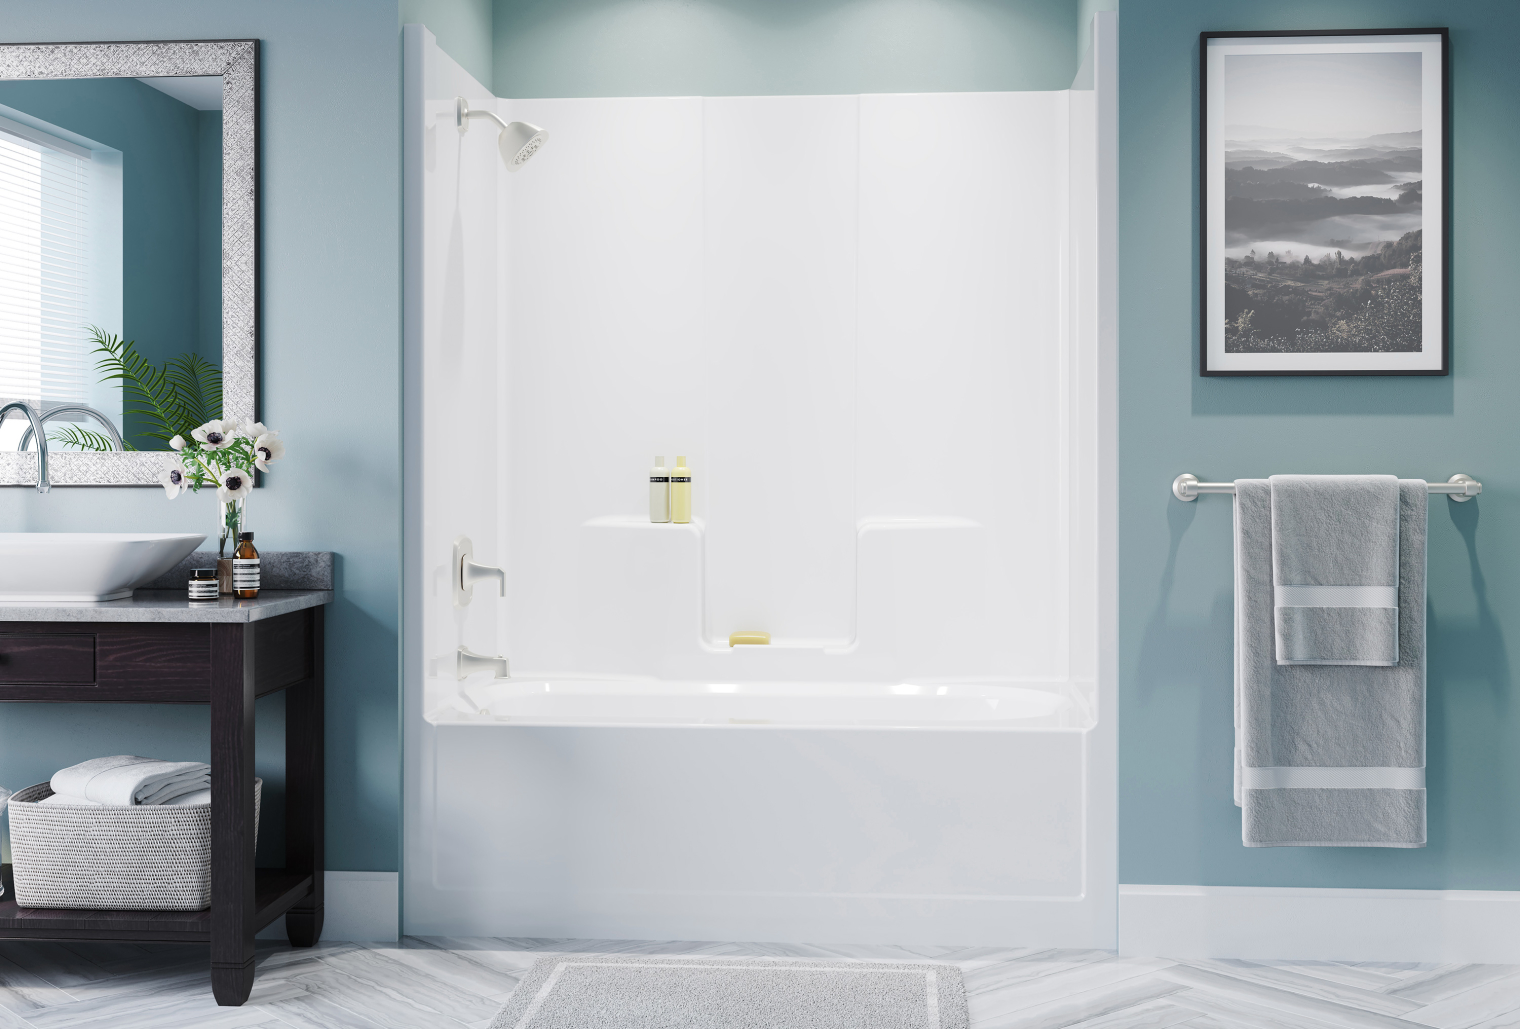 Image of a combo bath tub in a blue painted bathroom.